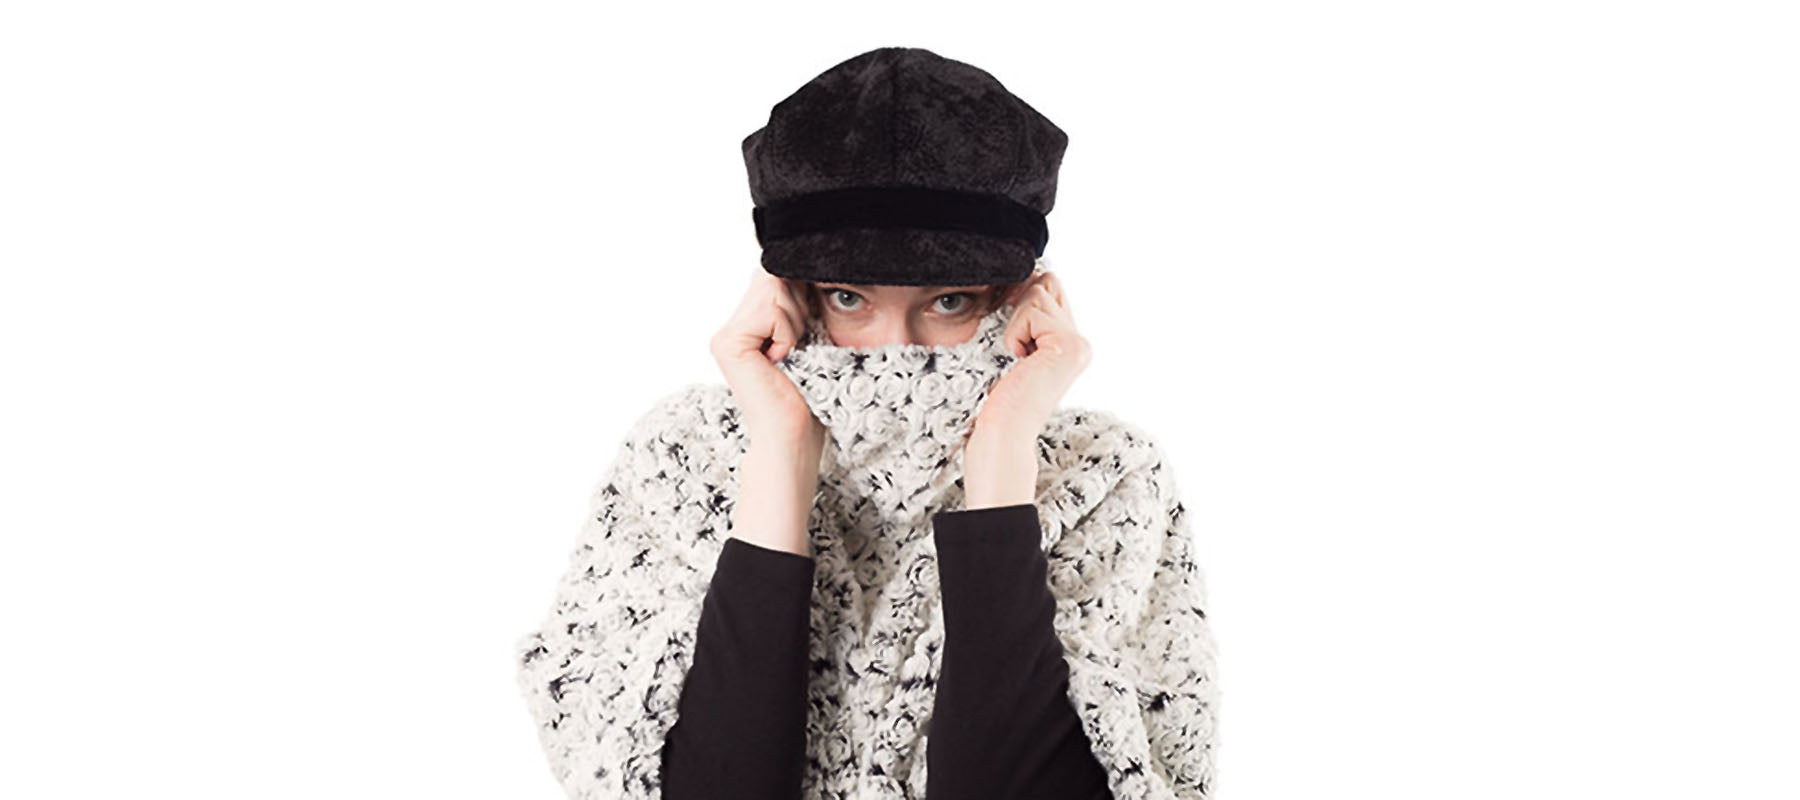 Woman Holding Collar of White Faux Fur Sweater over Face in Black Cap